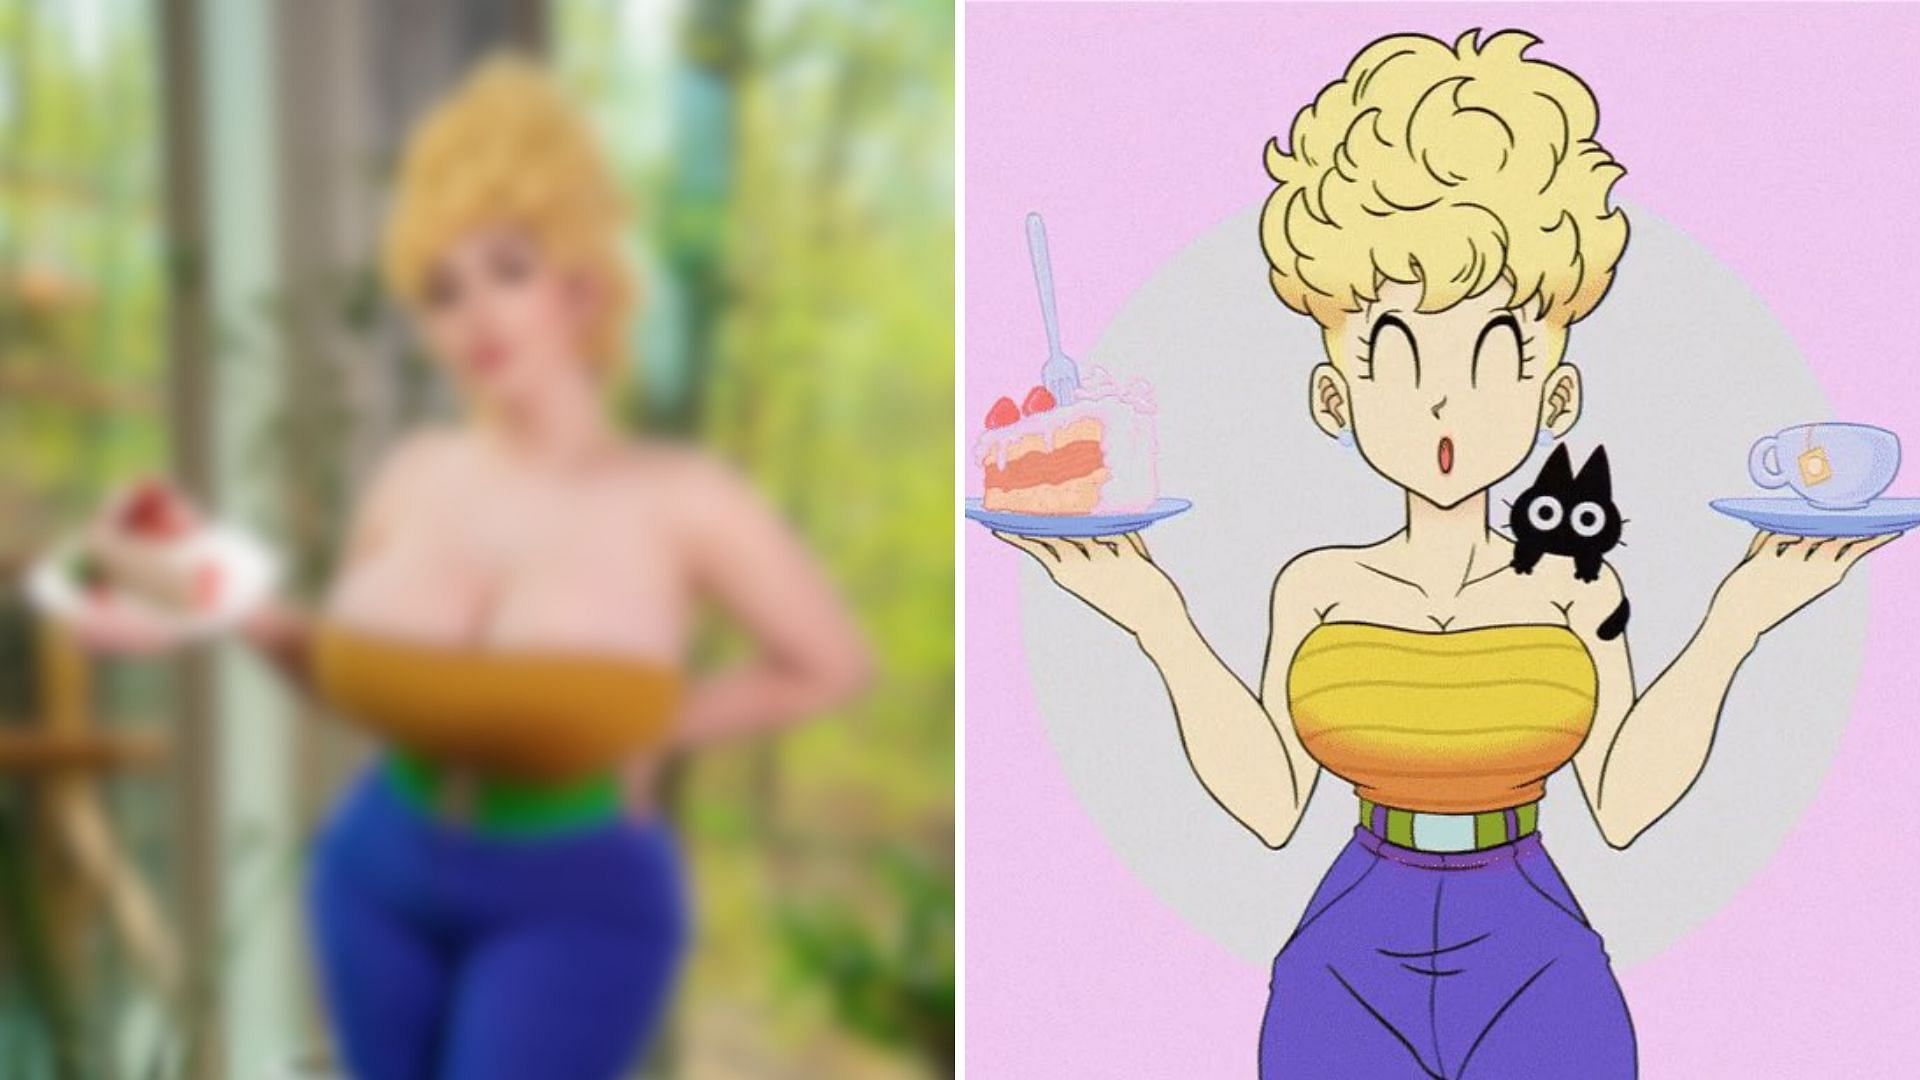 Dragon Ball cosplay brings Mrs. Briefs to life in jaw-dropping fashion (Image via Sportskeeda)